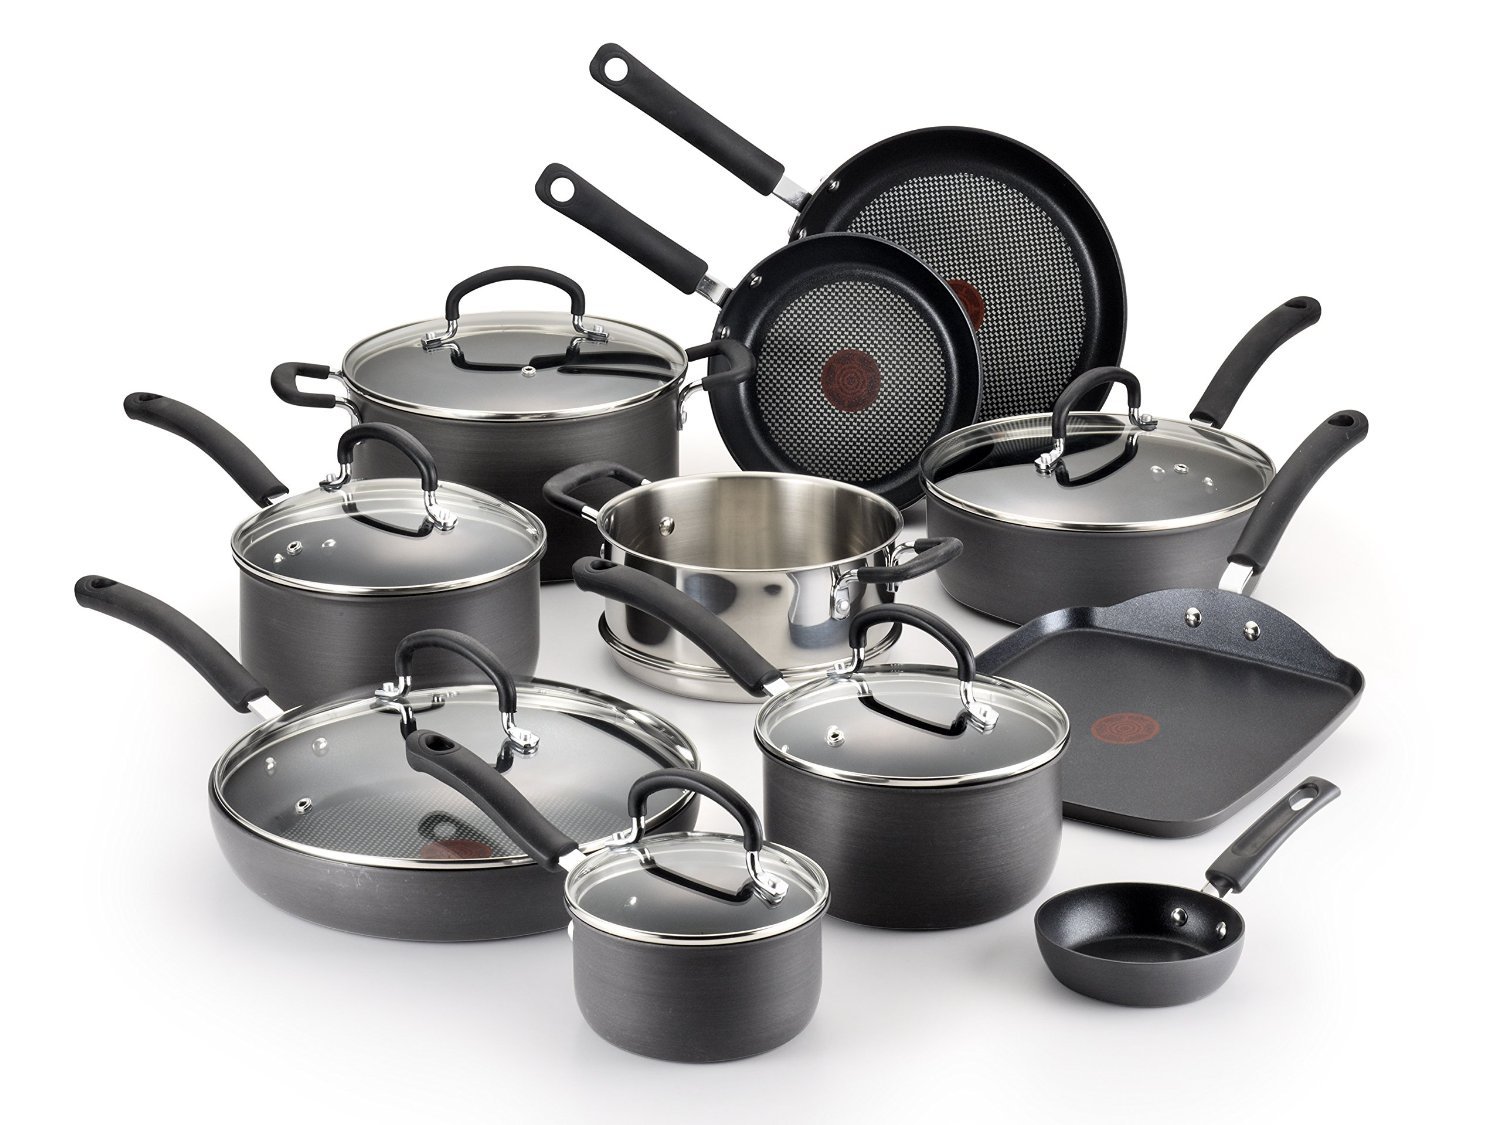 Hard Anodized Cookware from Paula Deen, This new line of Co…